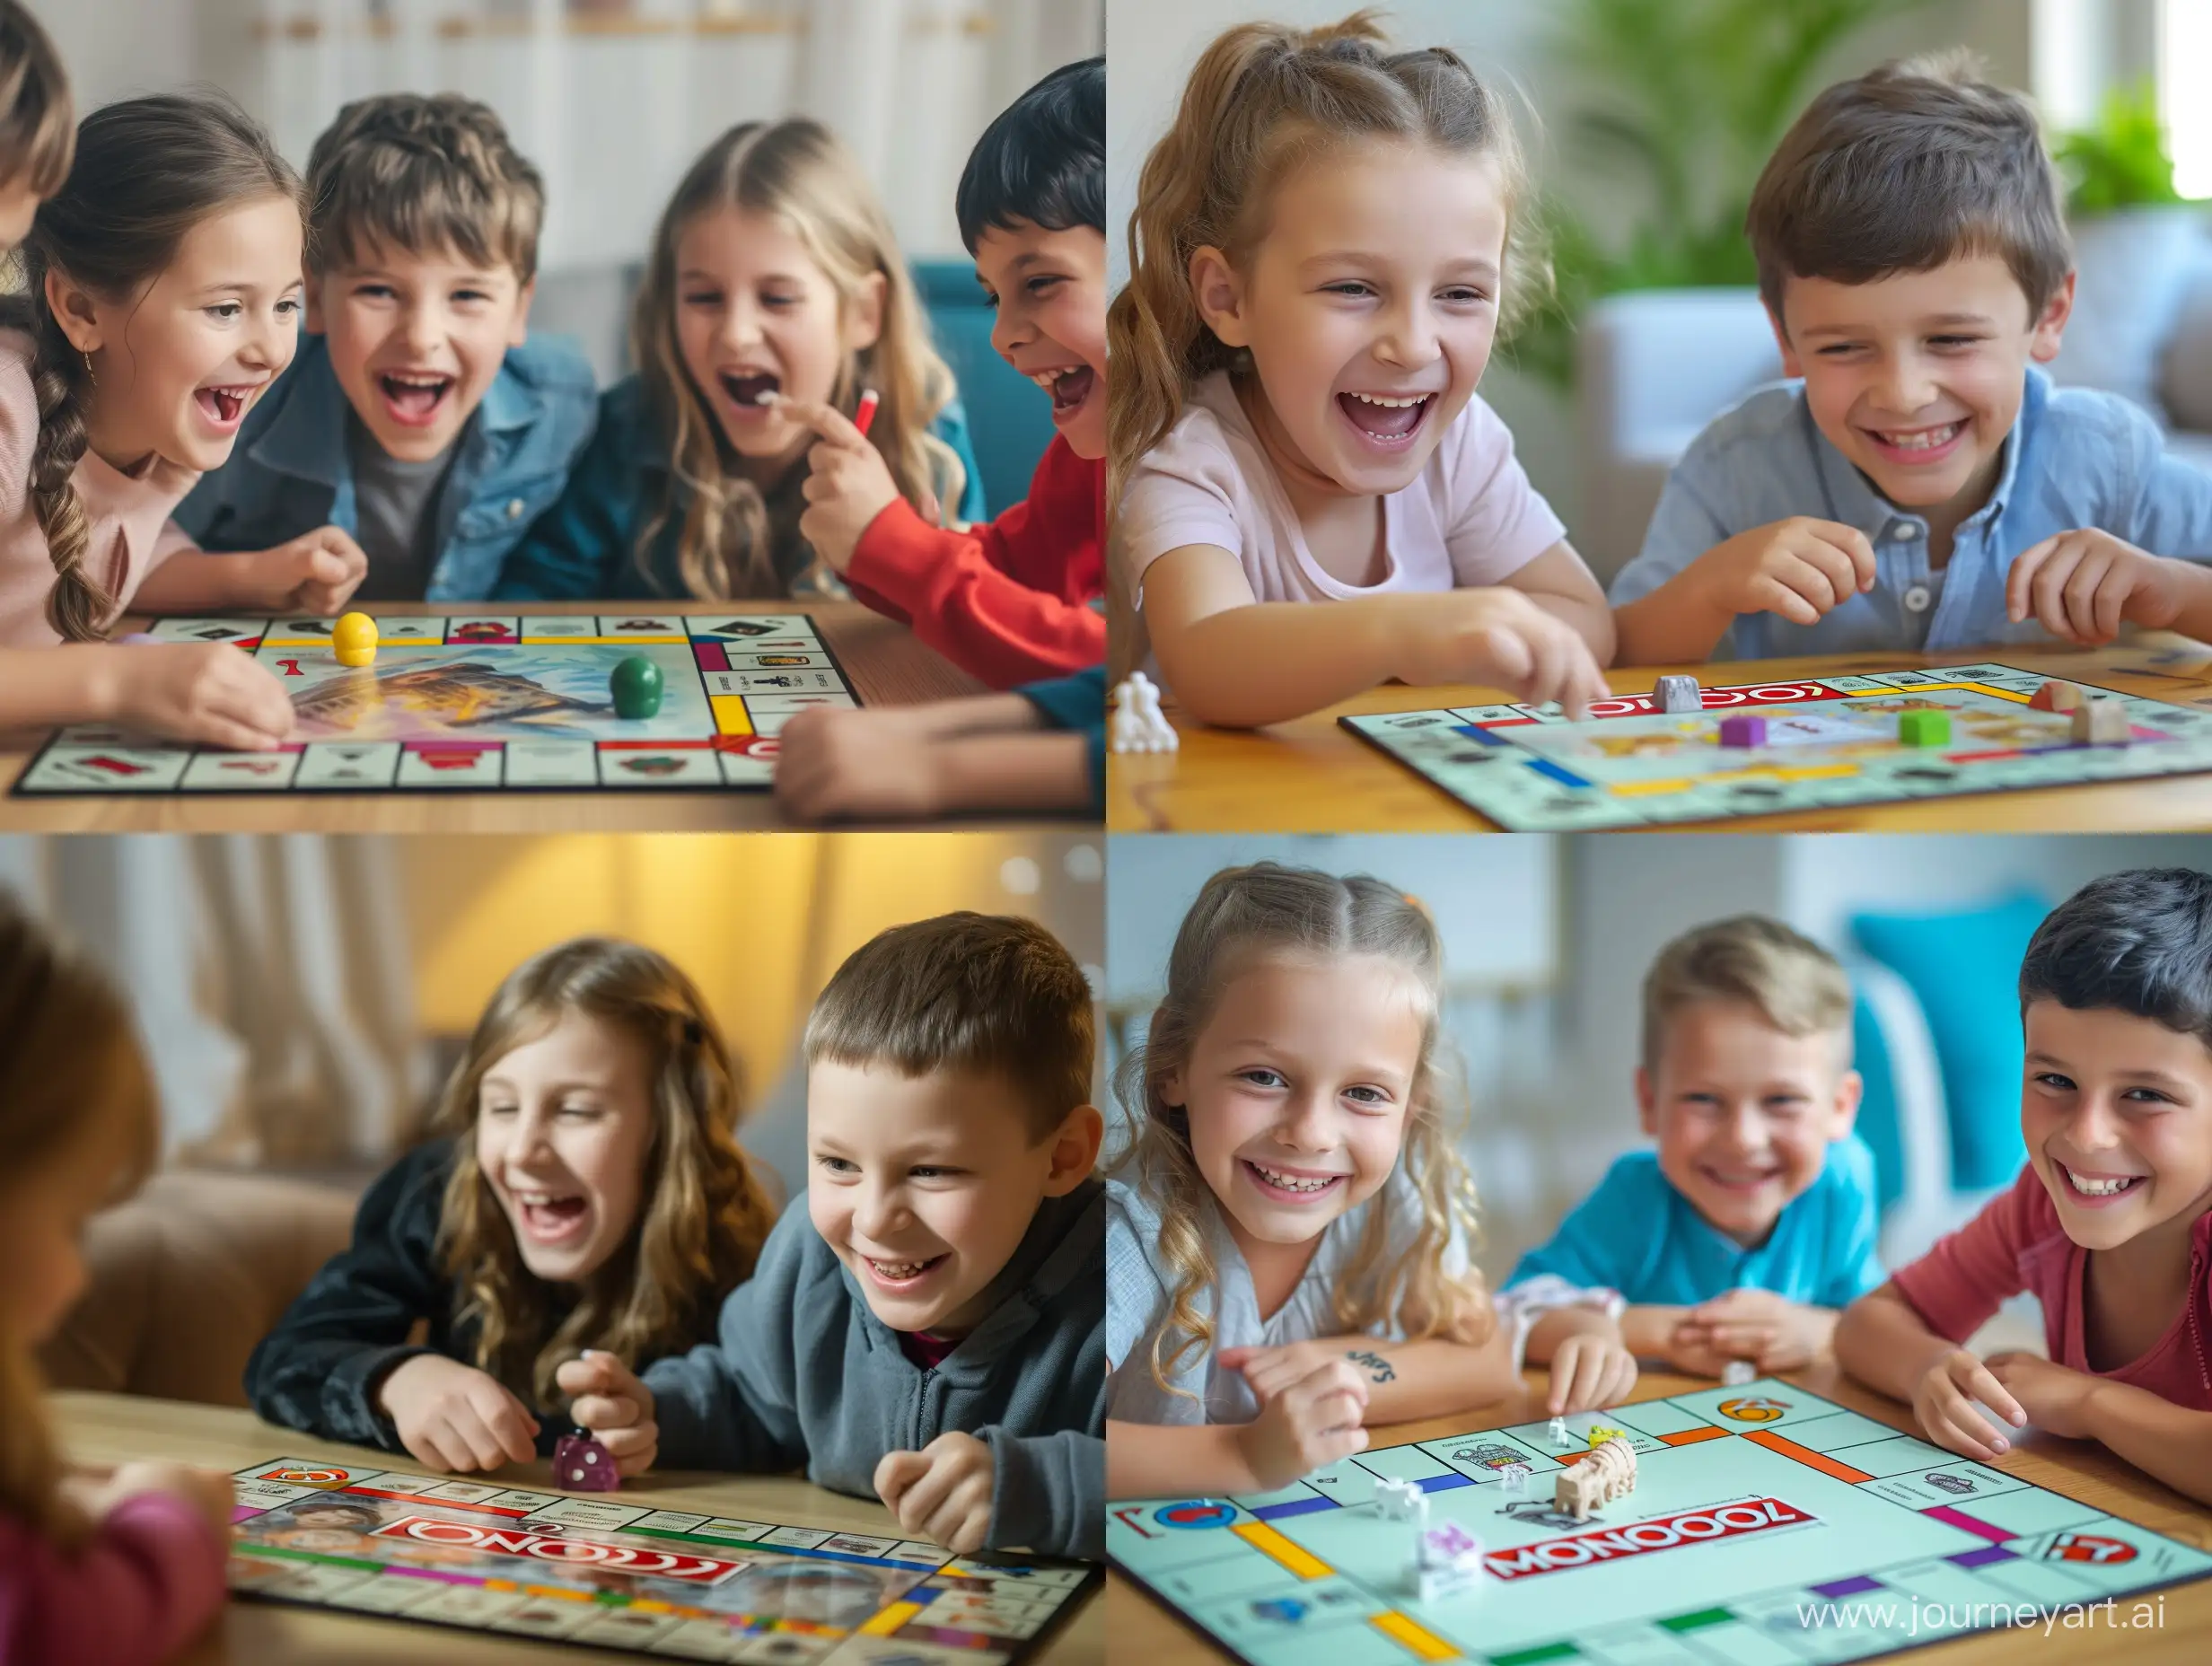 Joyful Children Playing Magic Table Game (Monopoly) Together